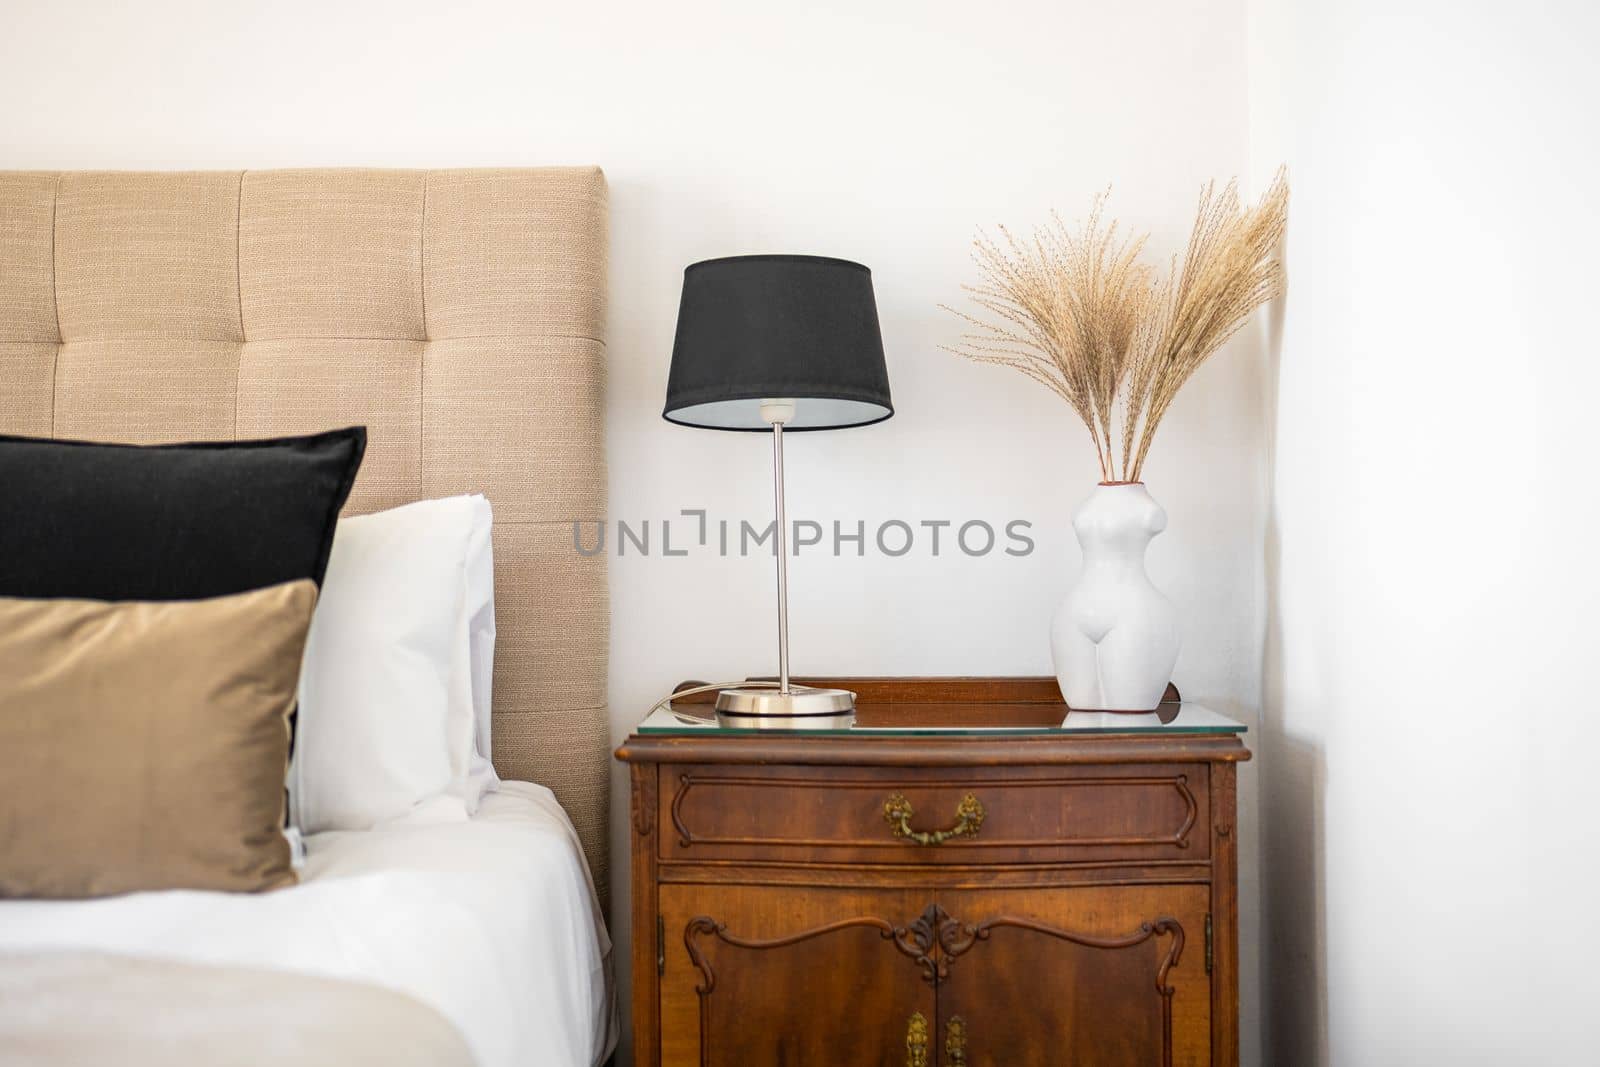 Chic bedroom interior with baroque bedside table with complex ornaments and monograms. On bedside table is night lamp with black shade and vase with decorative dried flowers. Bed with velor pillows